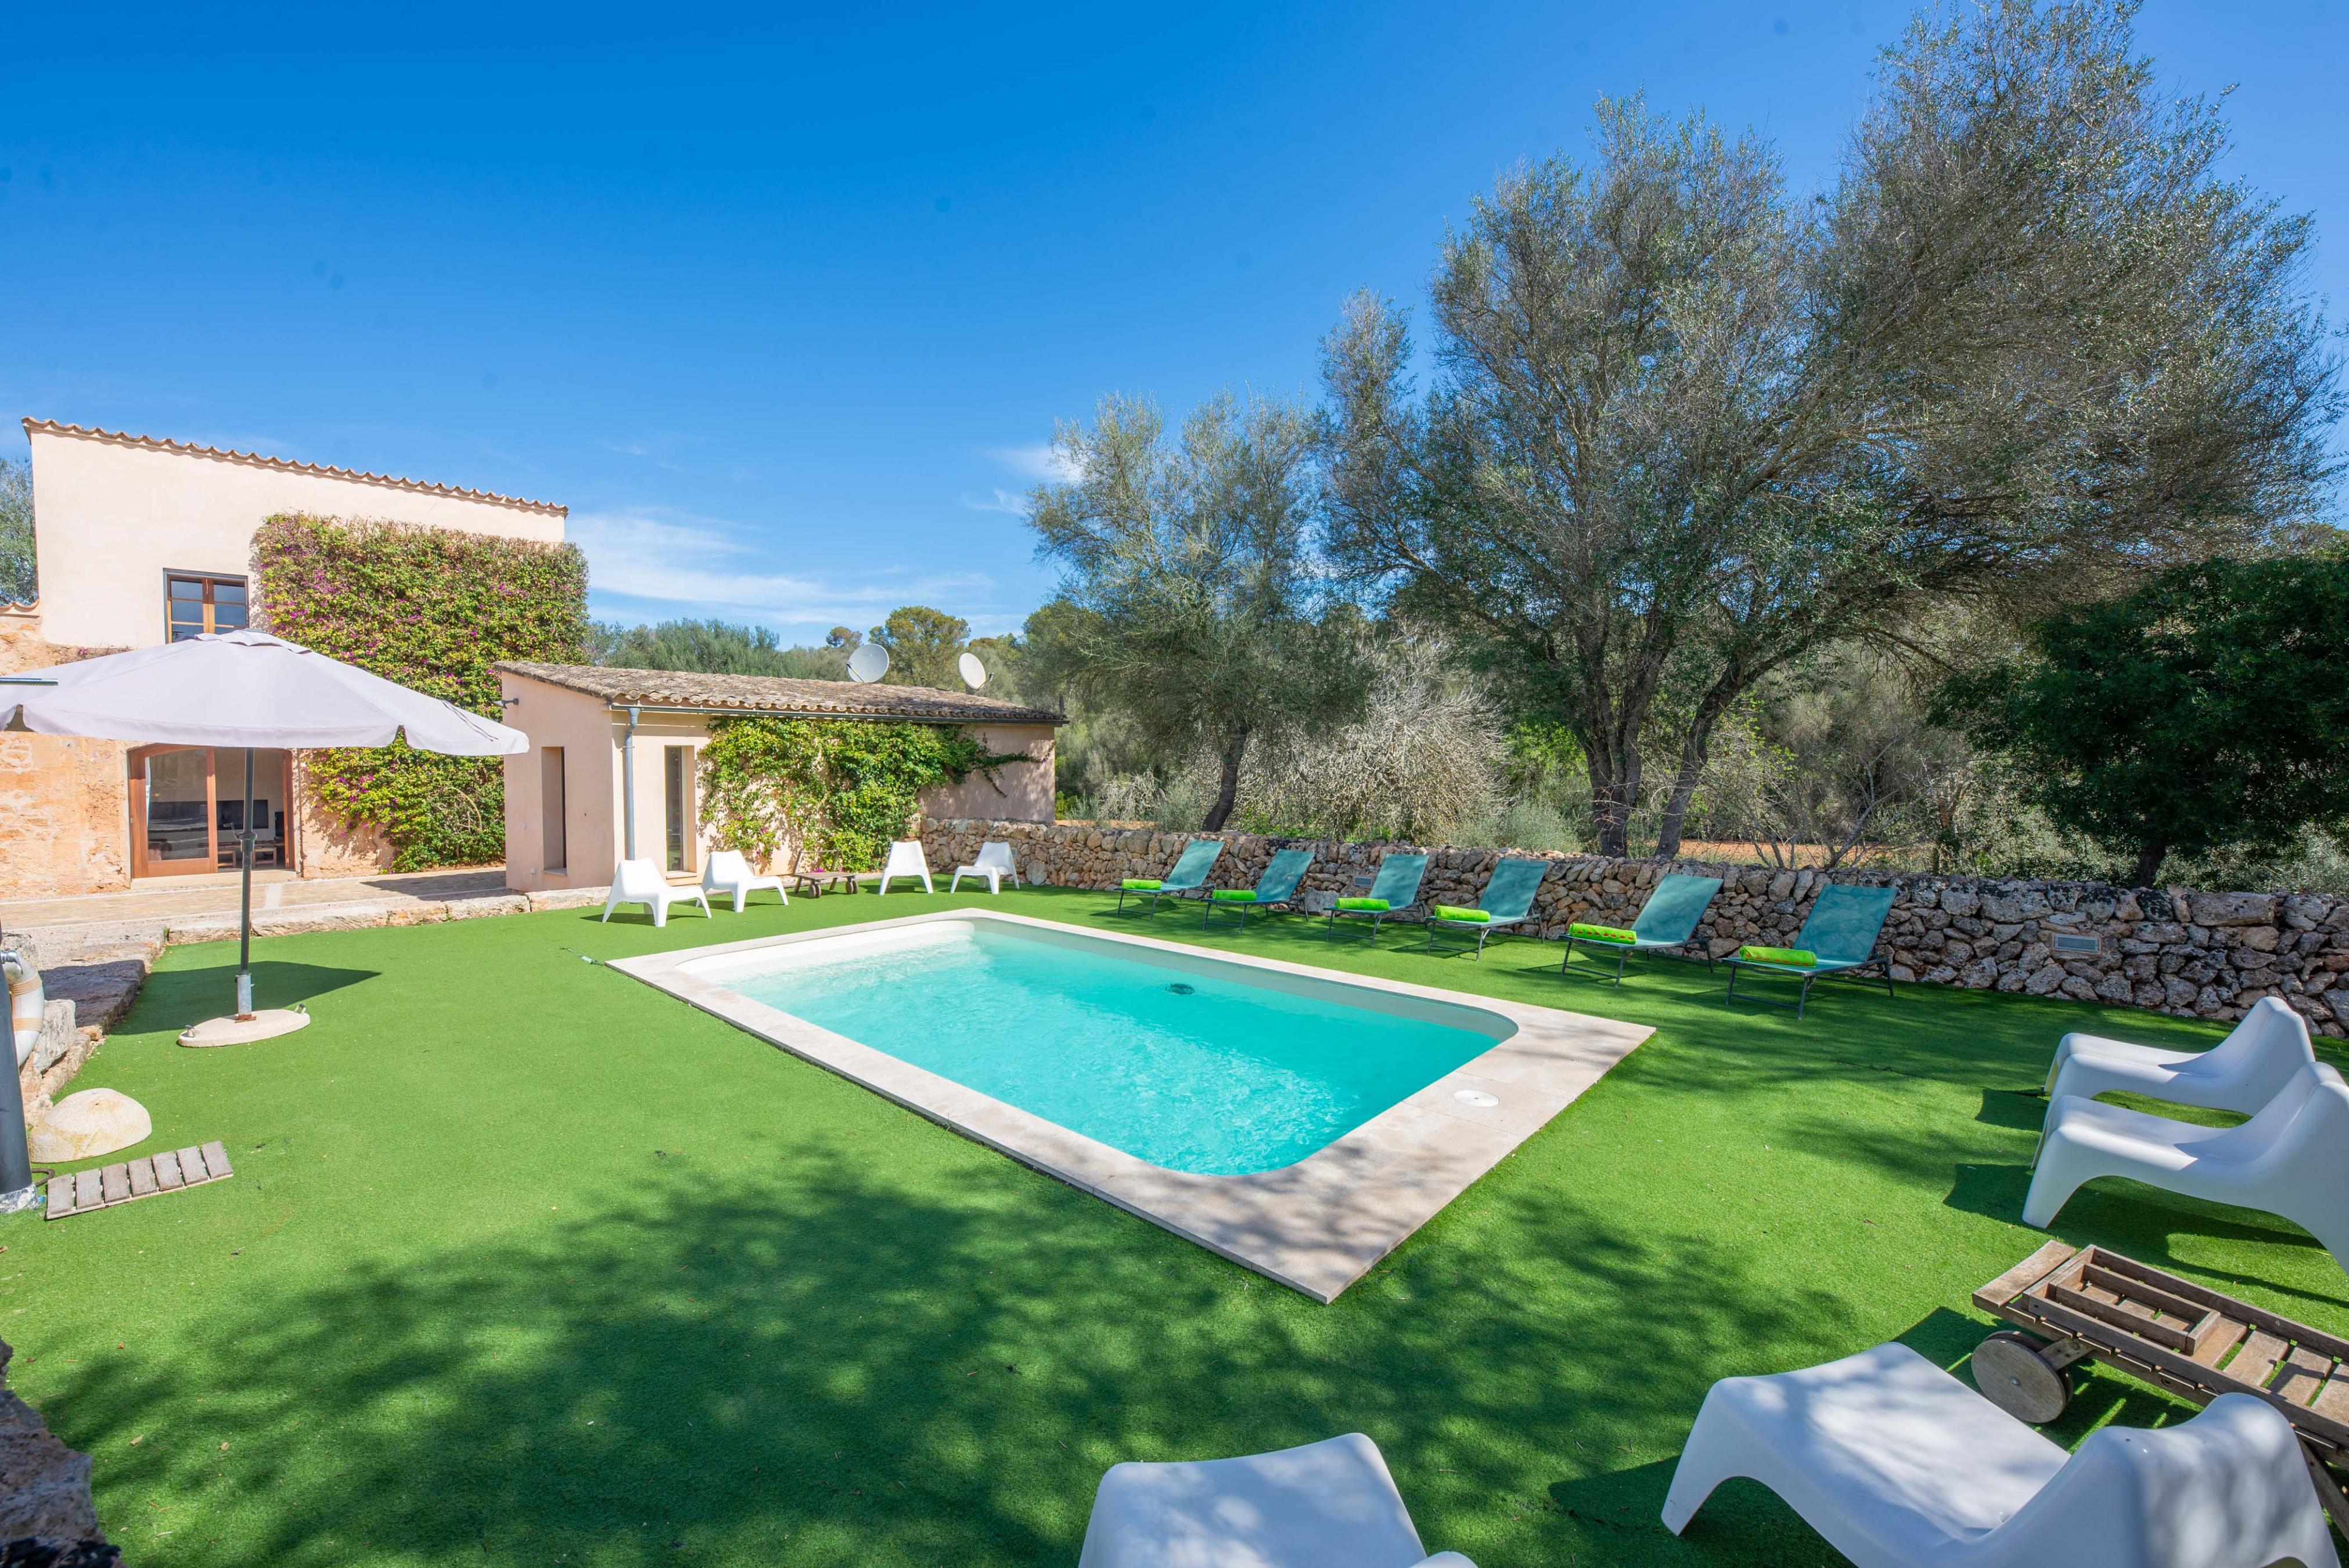 Property Image 2 - CAN PERE RAPINYA - Authentic Majorcan villa with private pool, located amidst nature and greenery Free WiF